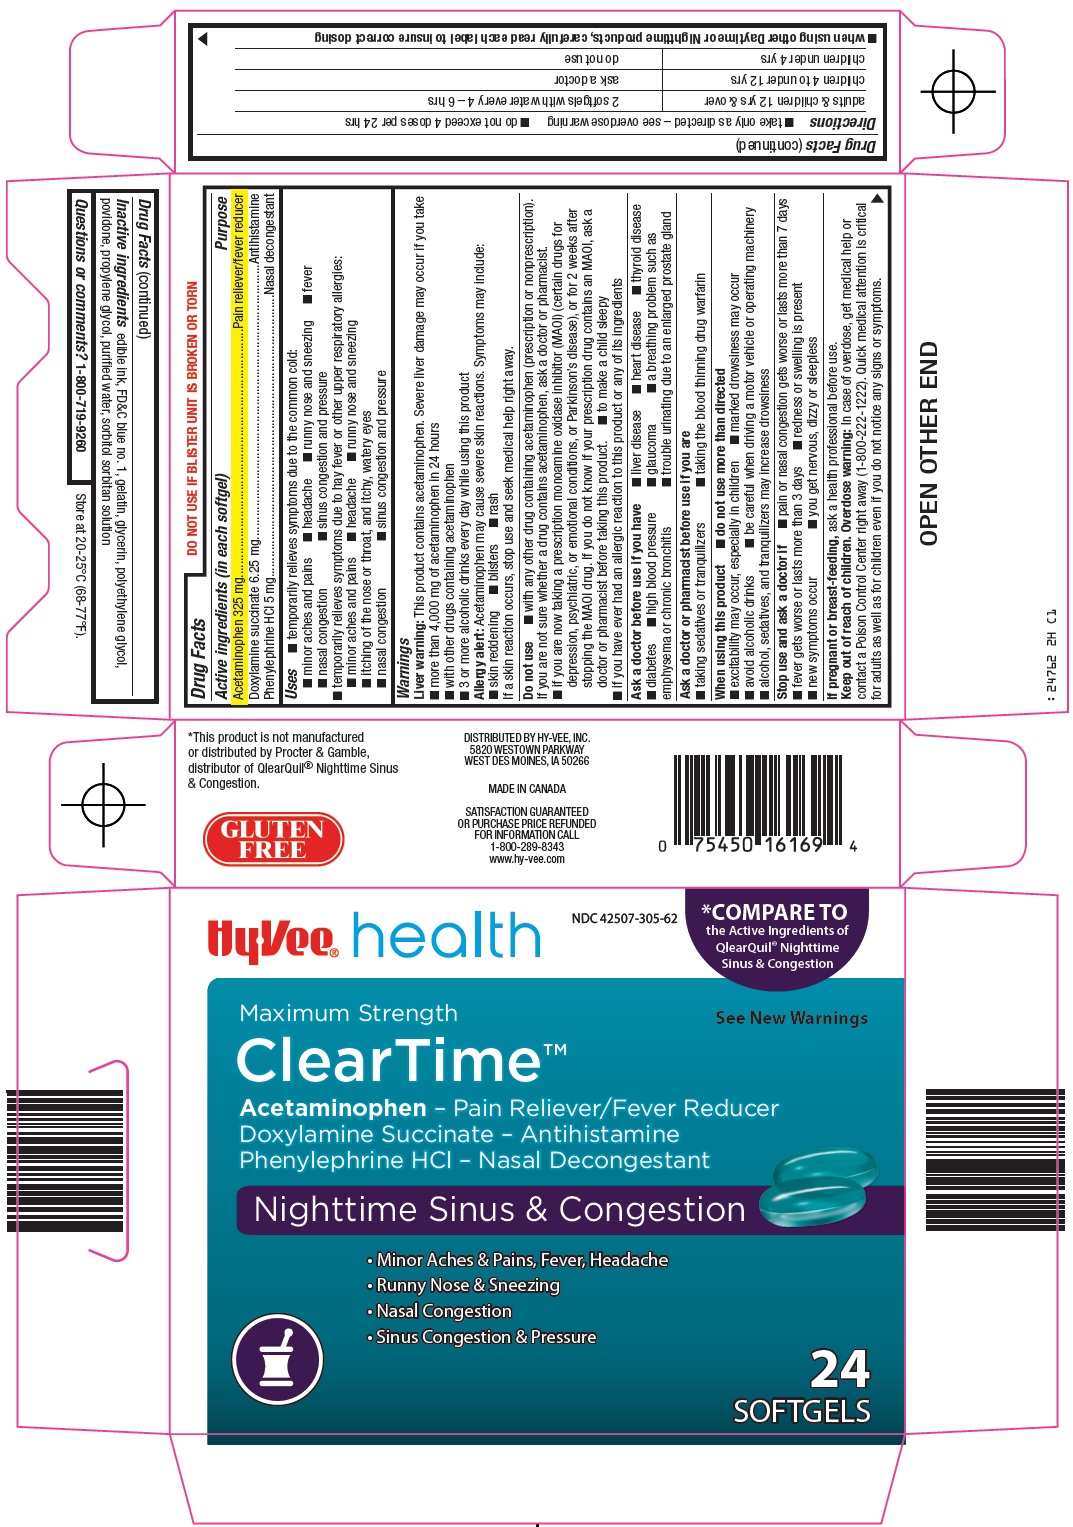 Hy-Vee, Inc. ClearTime Carton